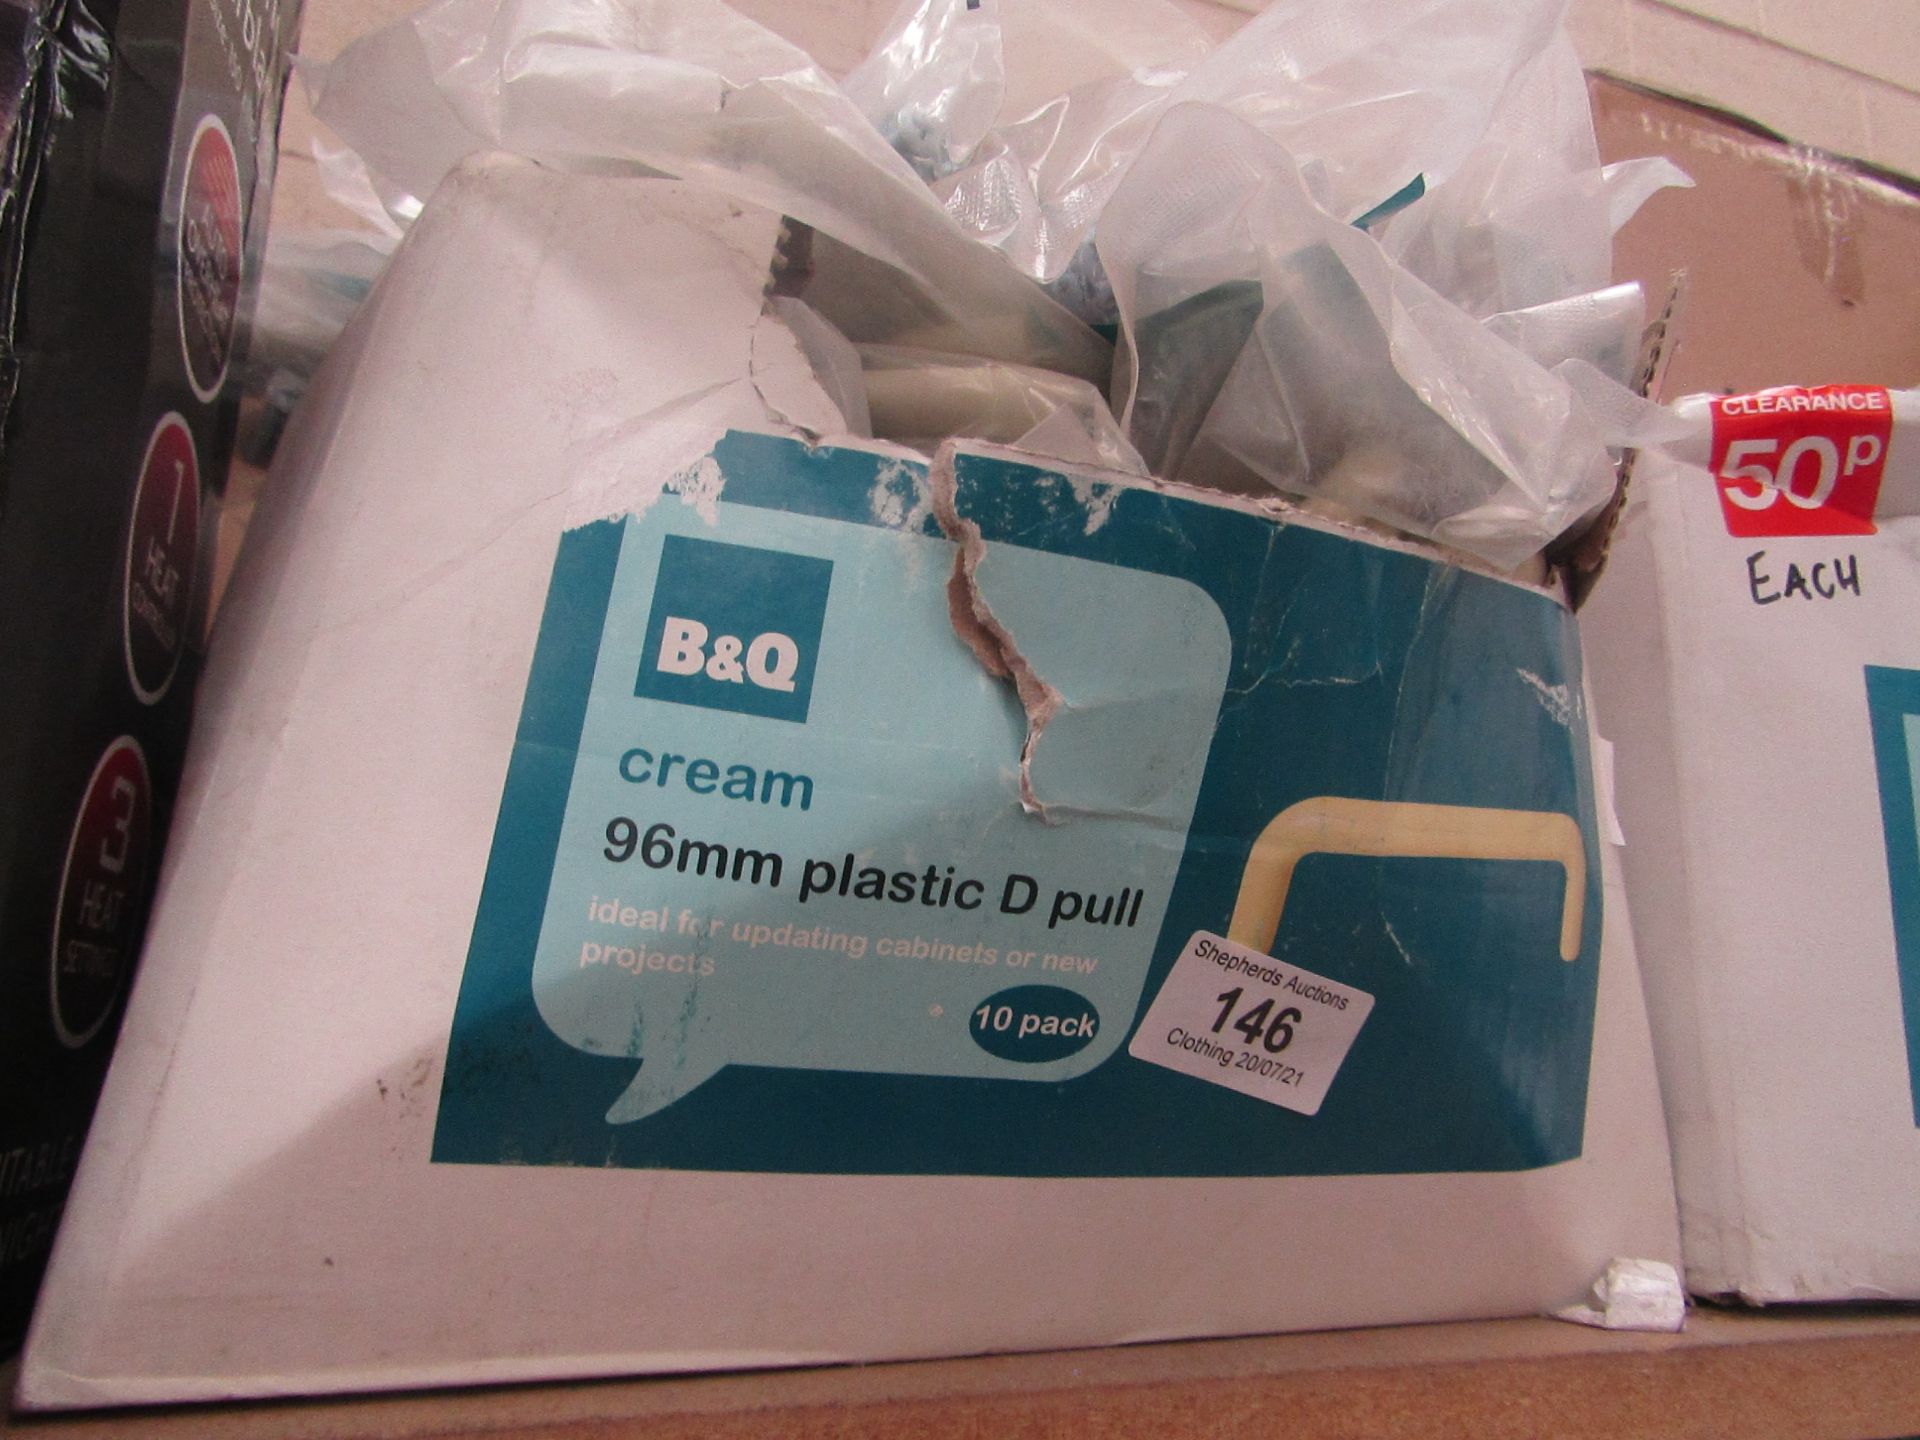 approx. x 20+ packs of 10 per pack B&Q 96mm Cream Plastic D Pull Handles new & packaged